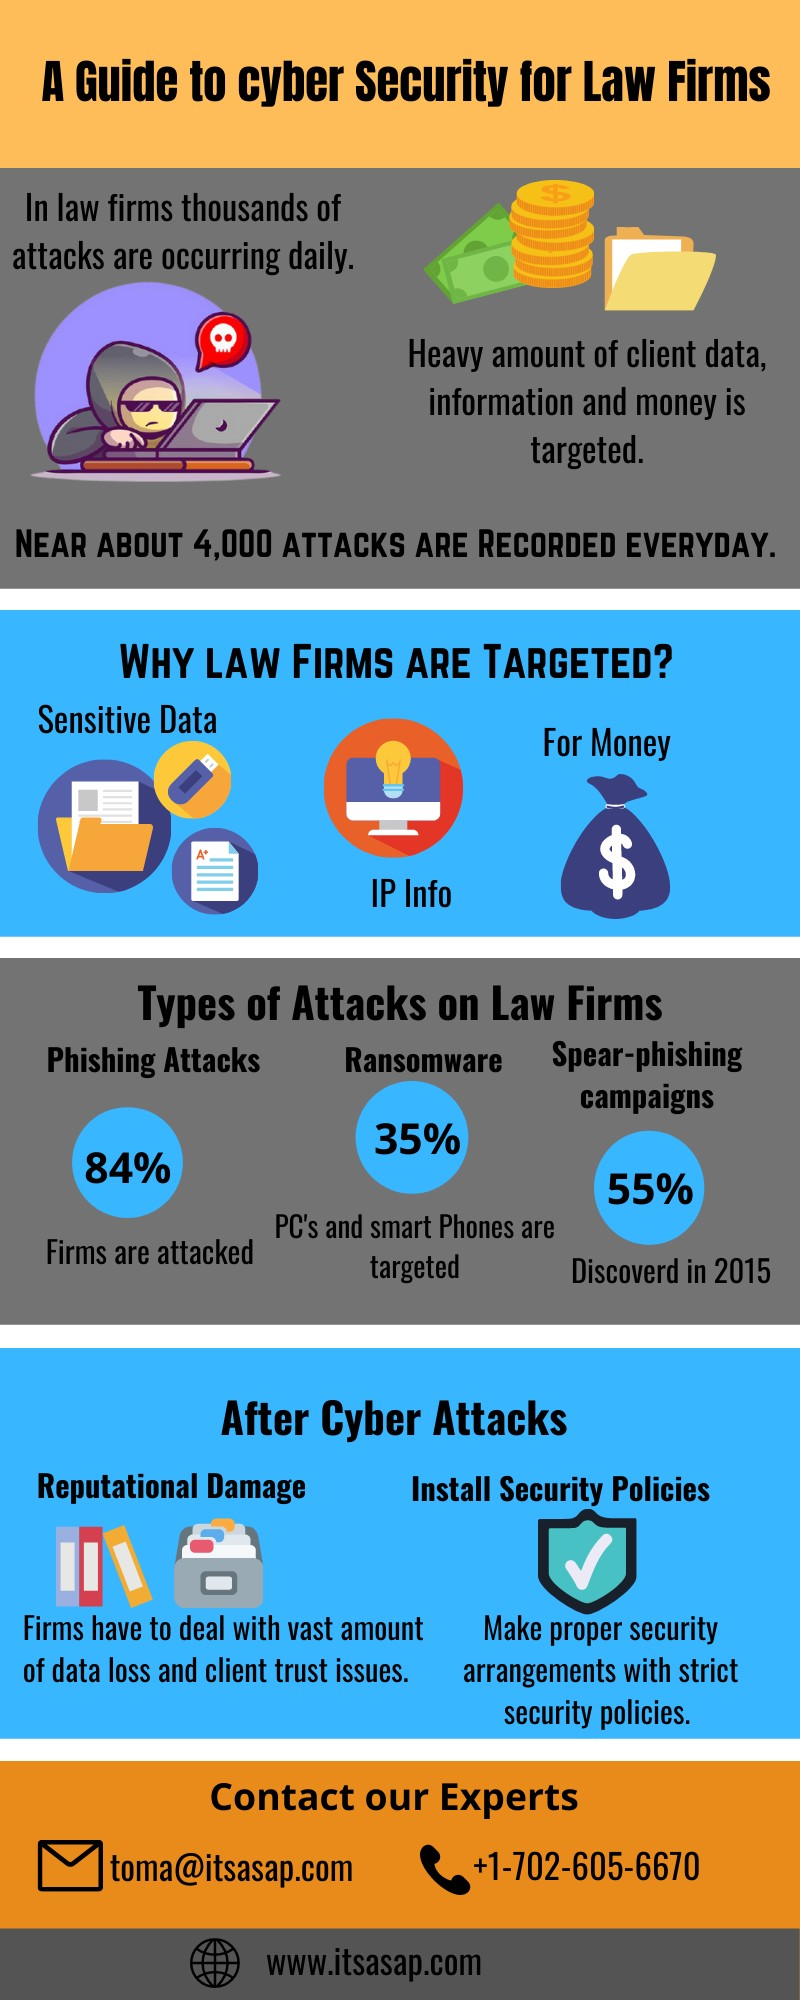 A Guide to Cyber Security for Law Firms